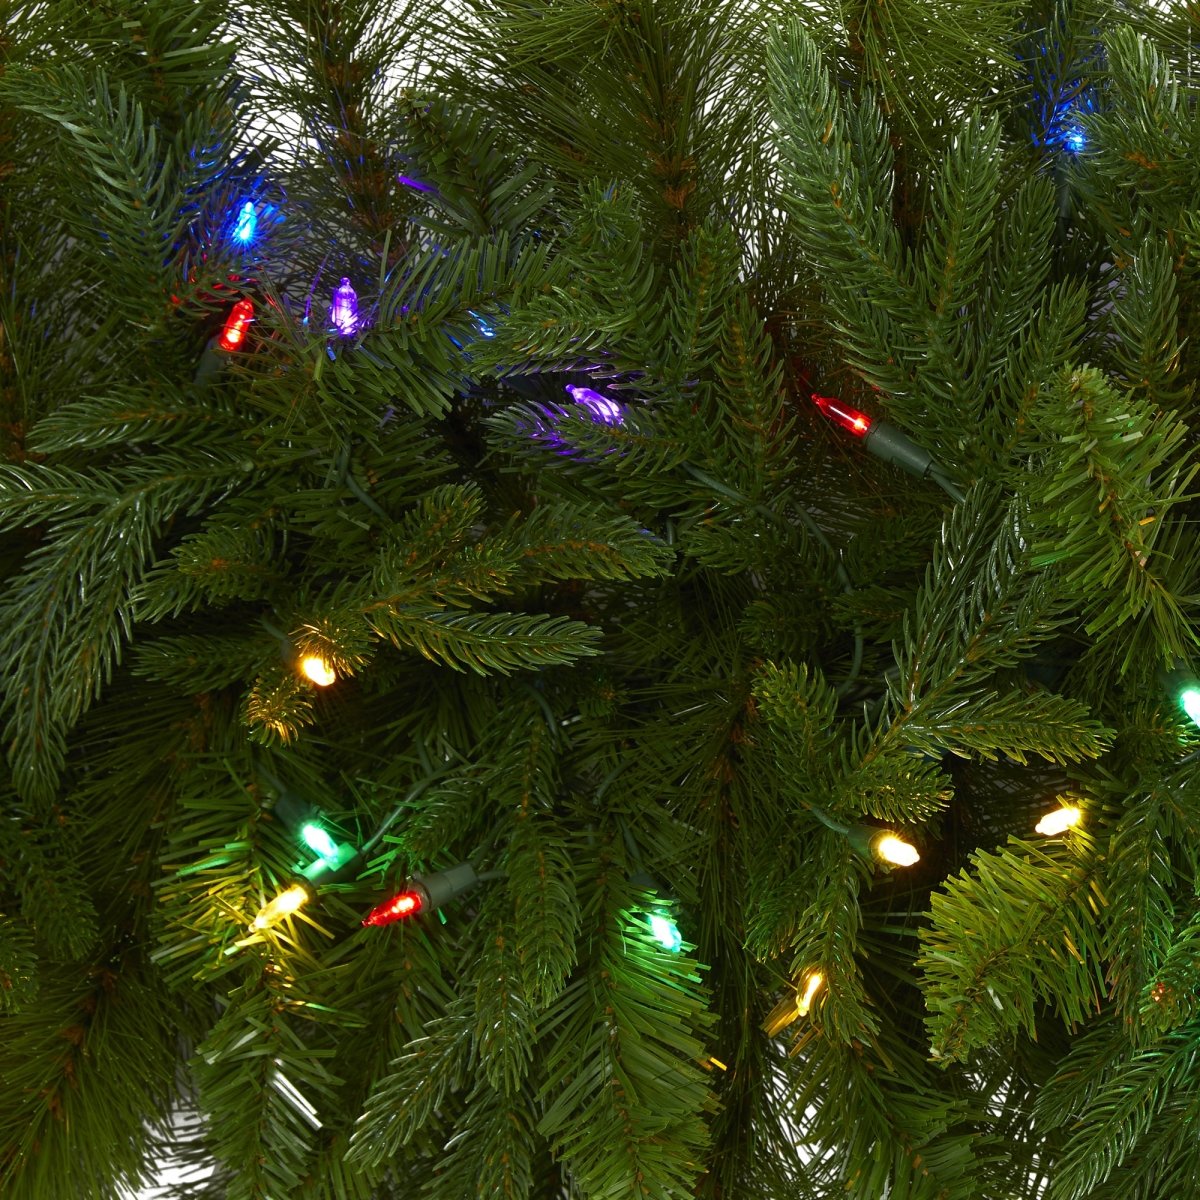 Nearly Natural 6' X 18” Christmas Pine Extra Wide Artificial Garland With 100 Multicolored Led Lights - lily & onyx